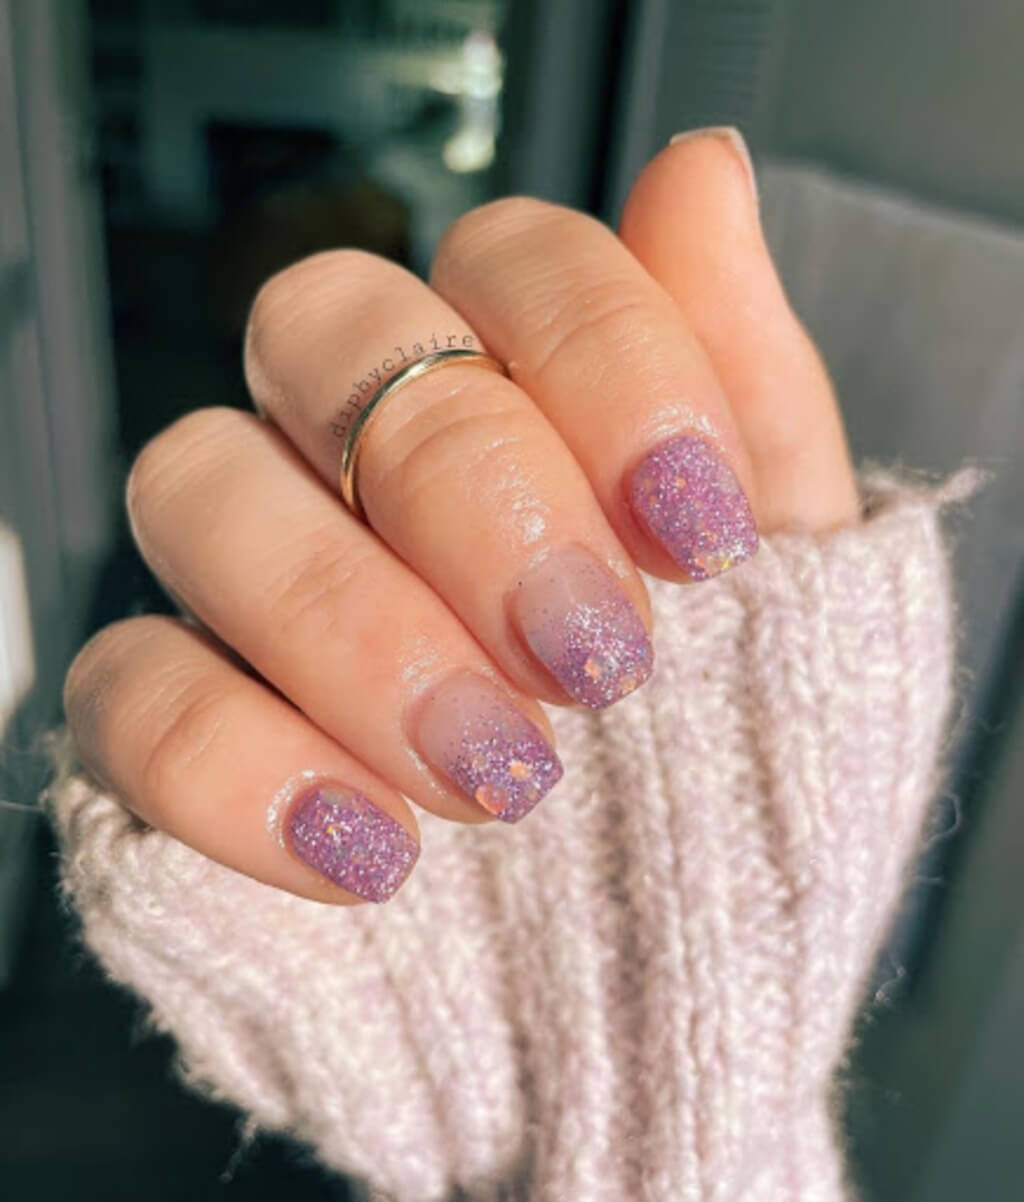 Squared Shaped and Glittery: manicure designs